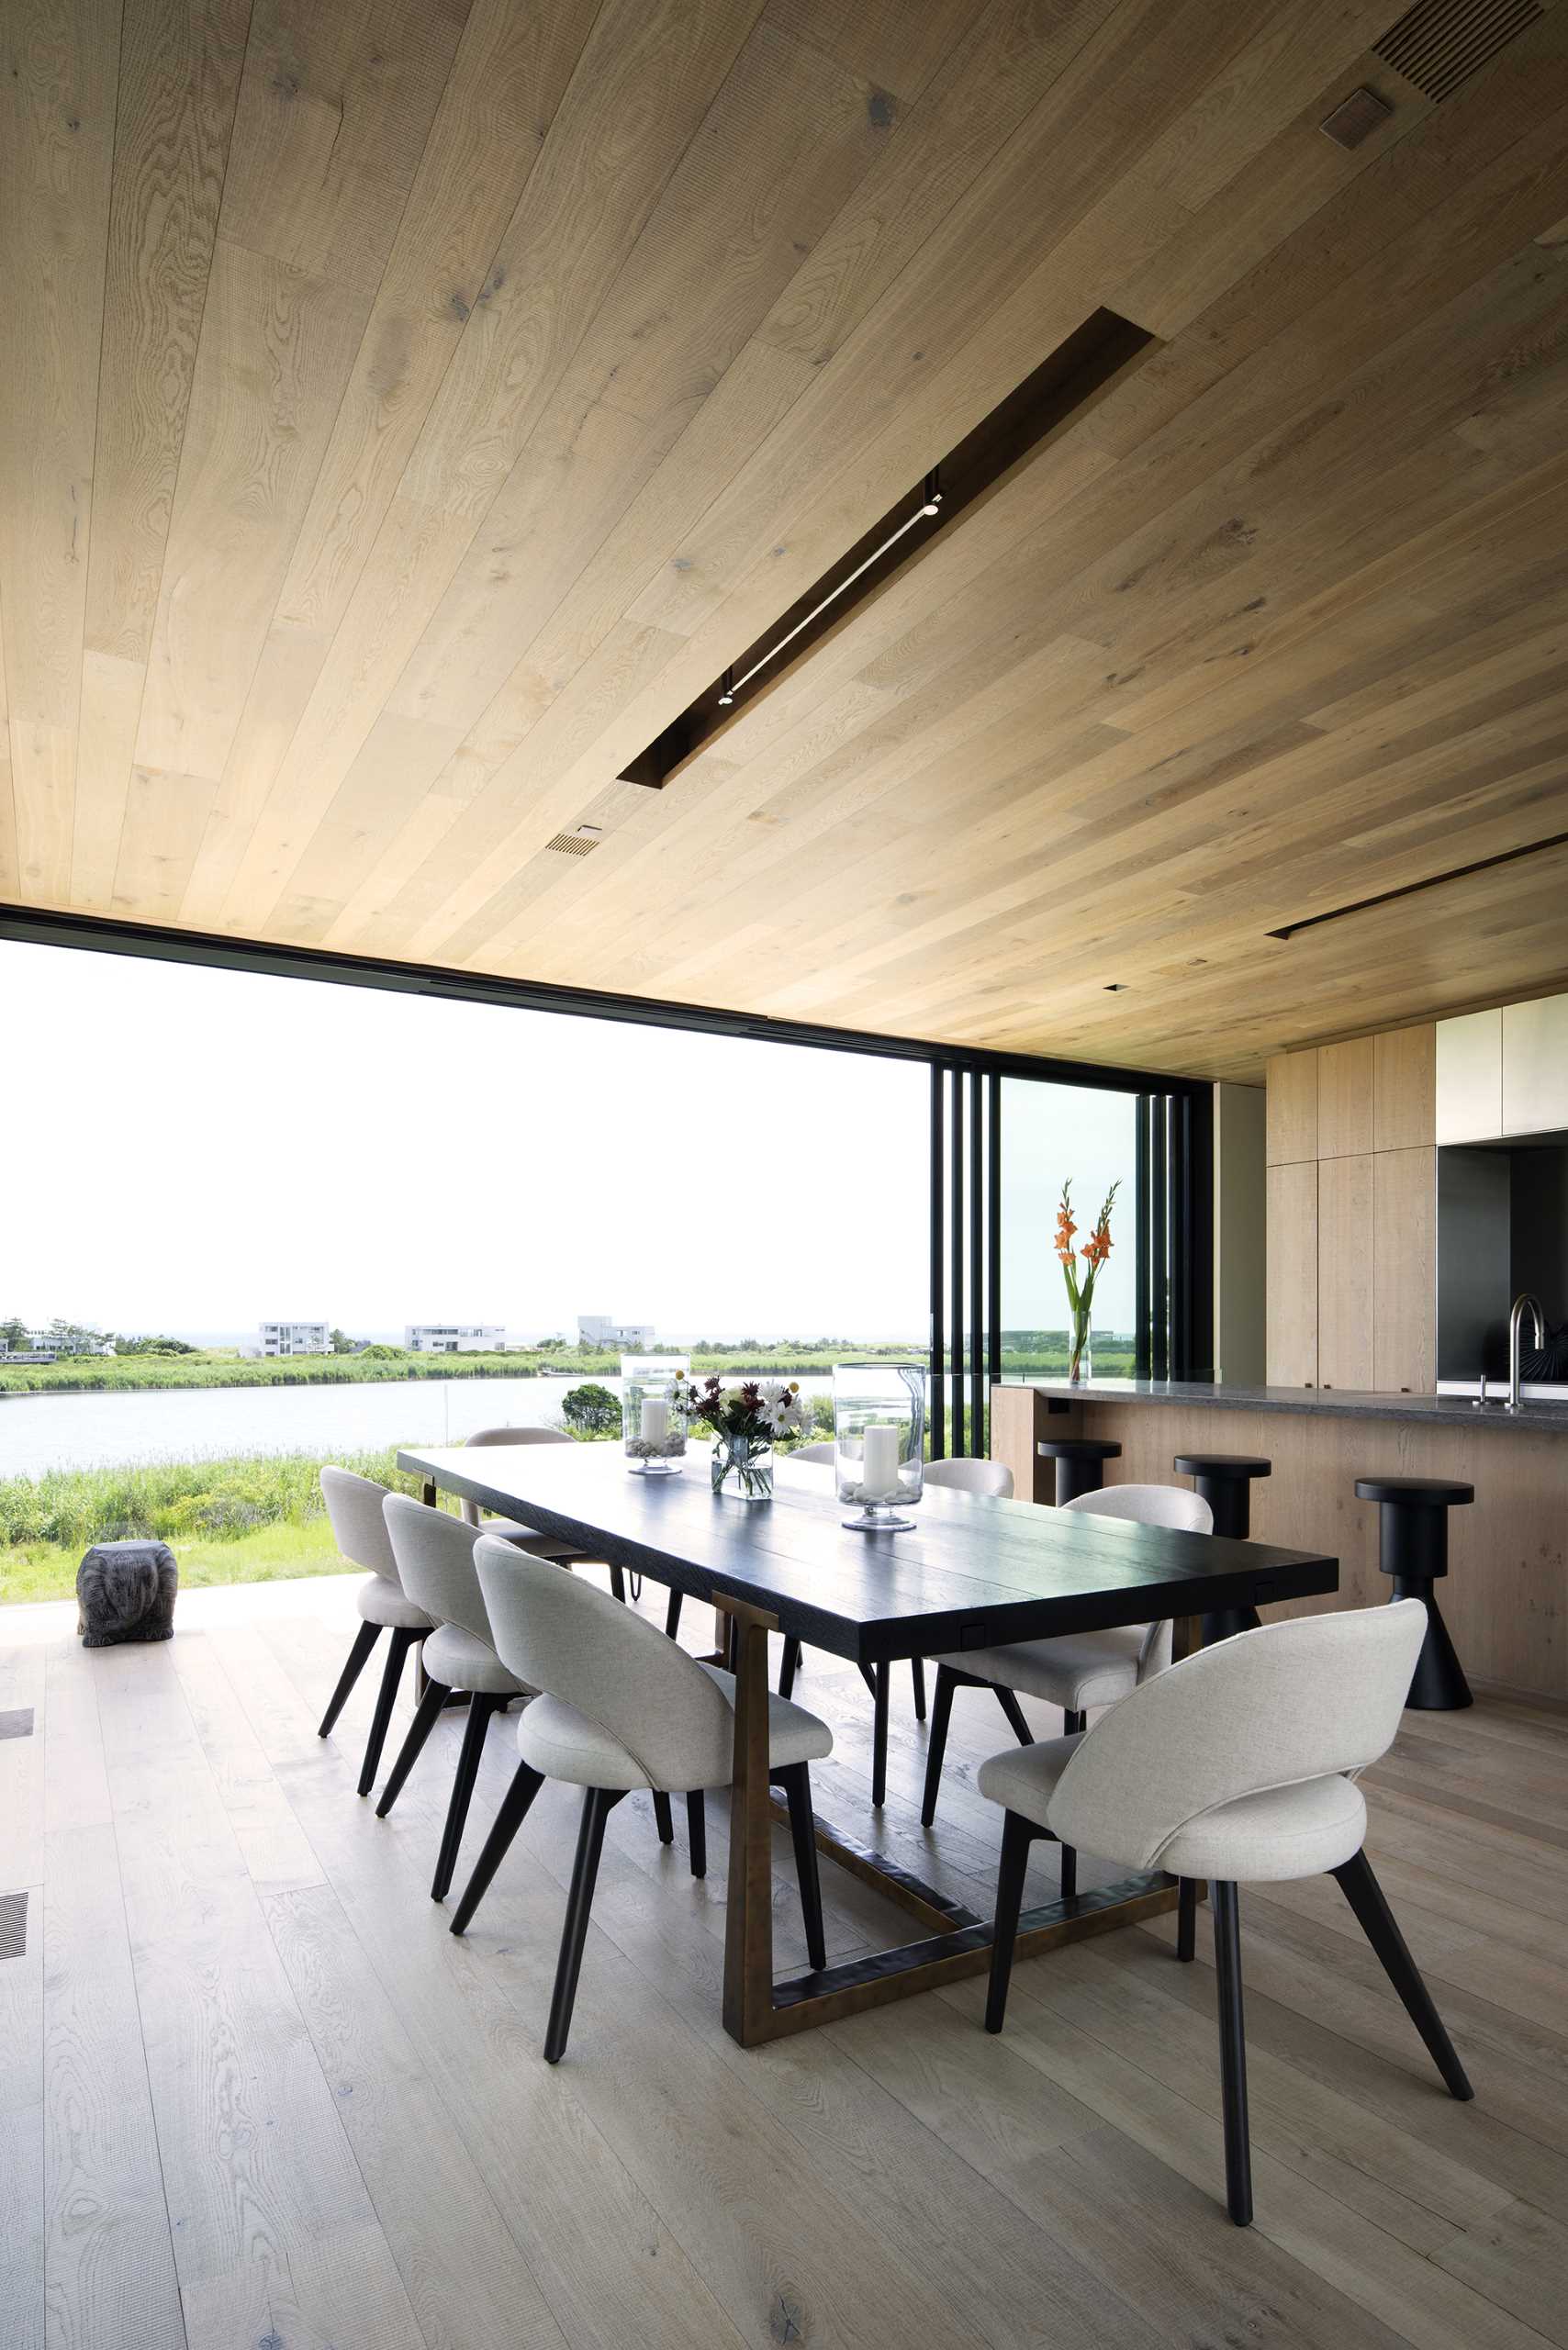 The dining area and kitchen share the same space in this modern home, while the wood ceiling features recessed lighting.